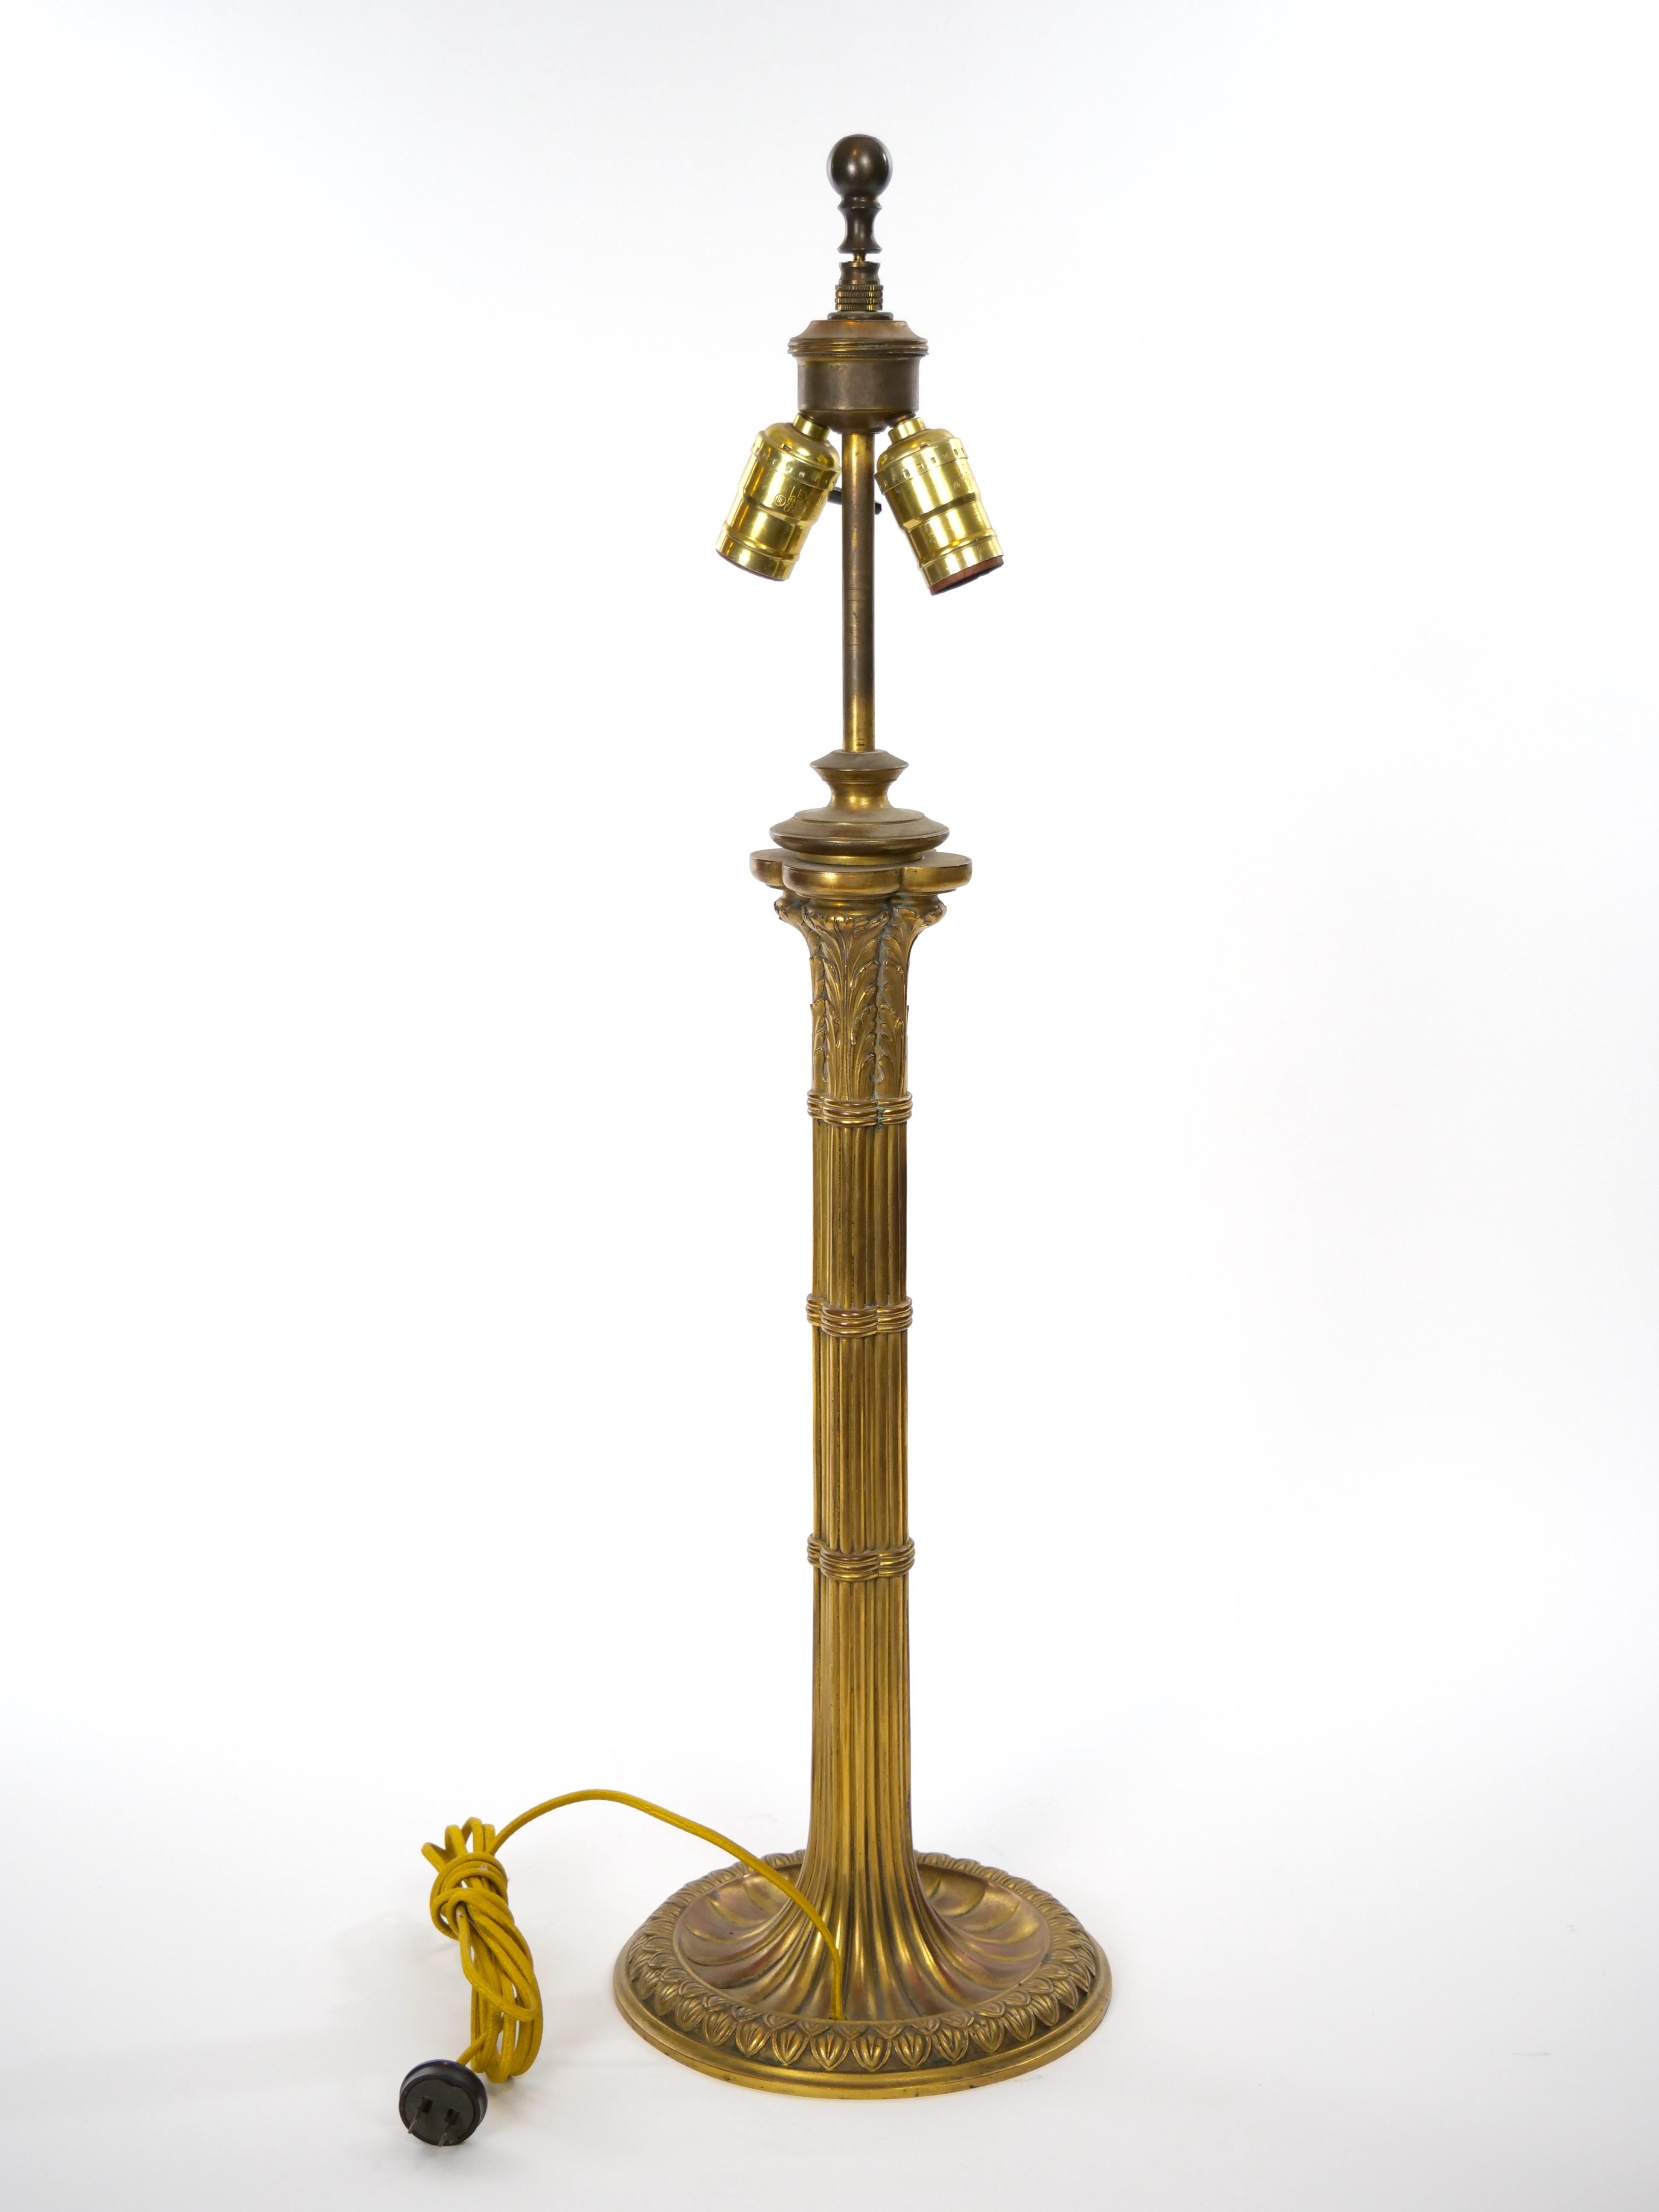 Mid 19th century gilt bronze candlestick style table lamp resting on a round pedestal base with silk fringe shade. The lamp is in great working condition. Minor wear consistent with age / use. Shade is worn with small tear.